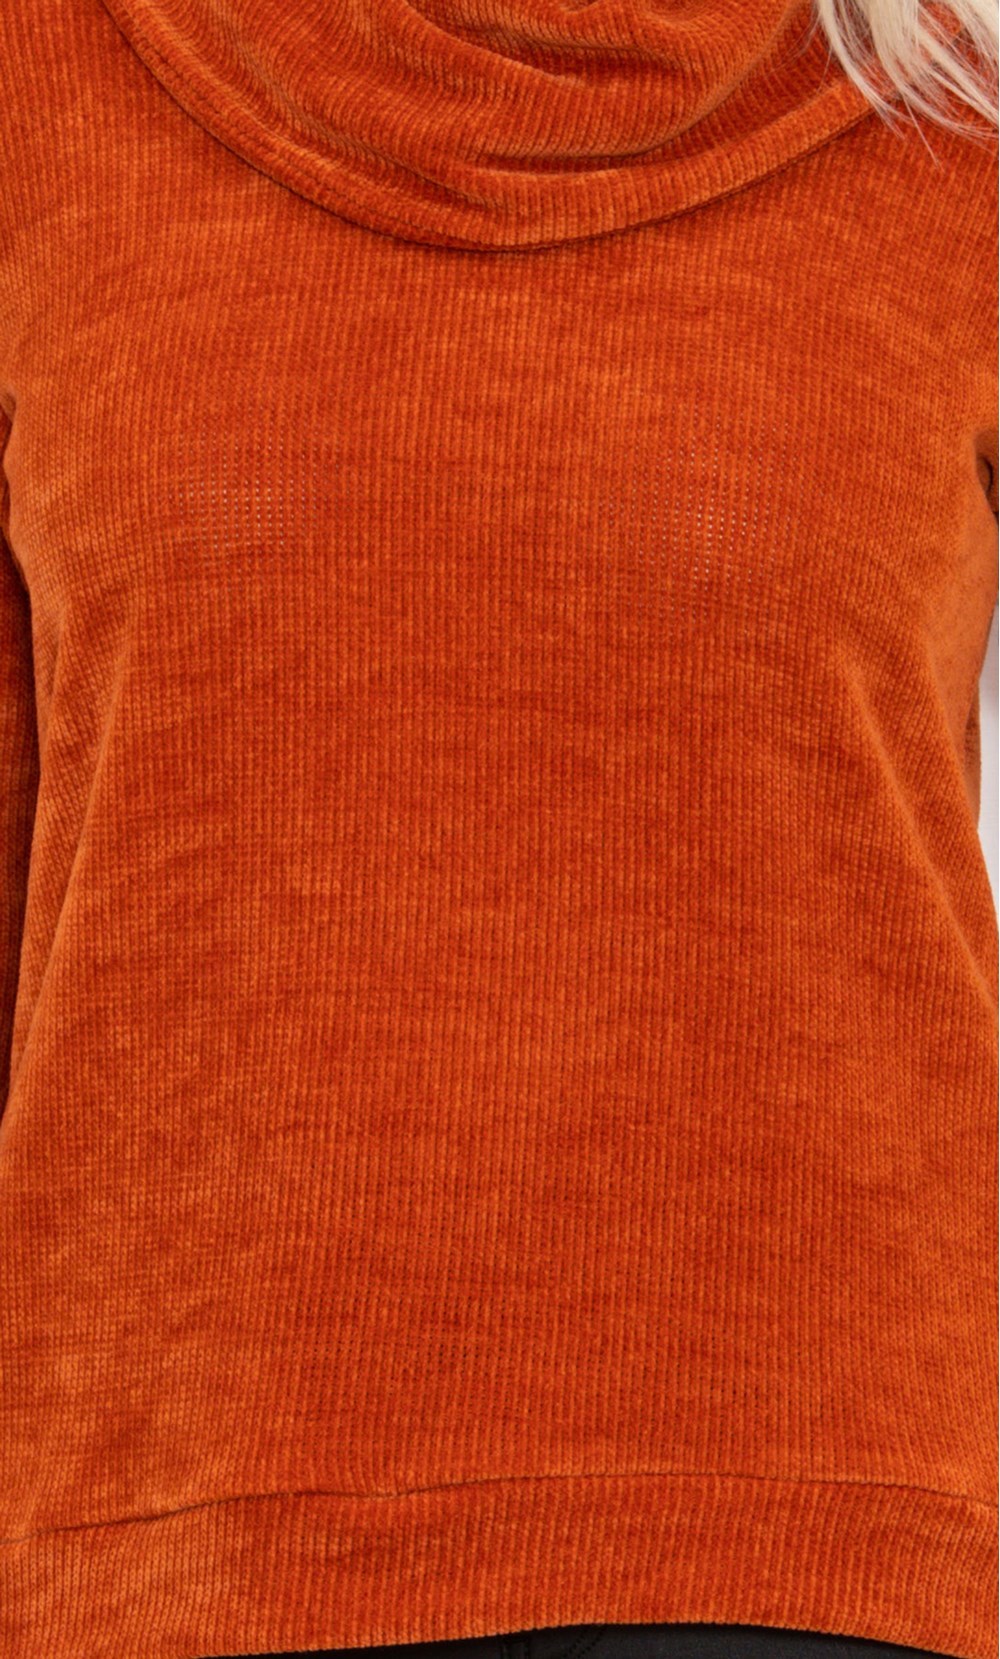 Cowl Neck Knit Top